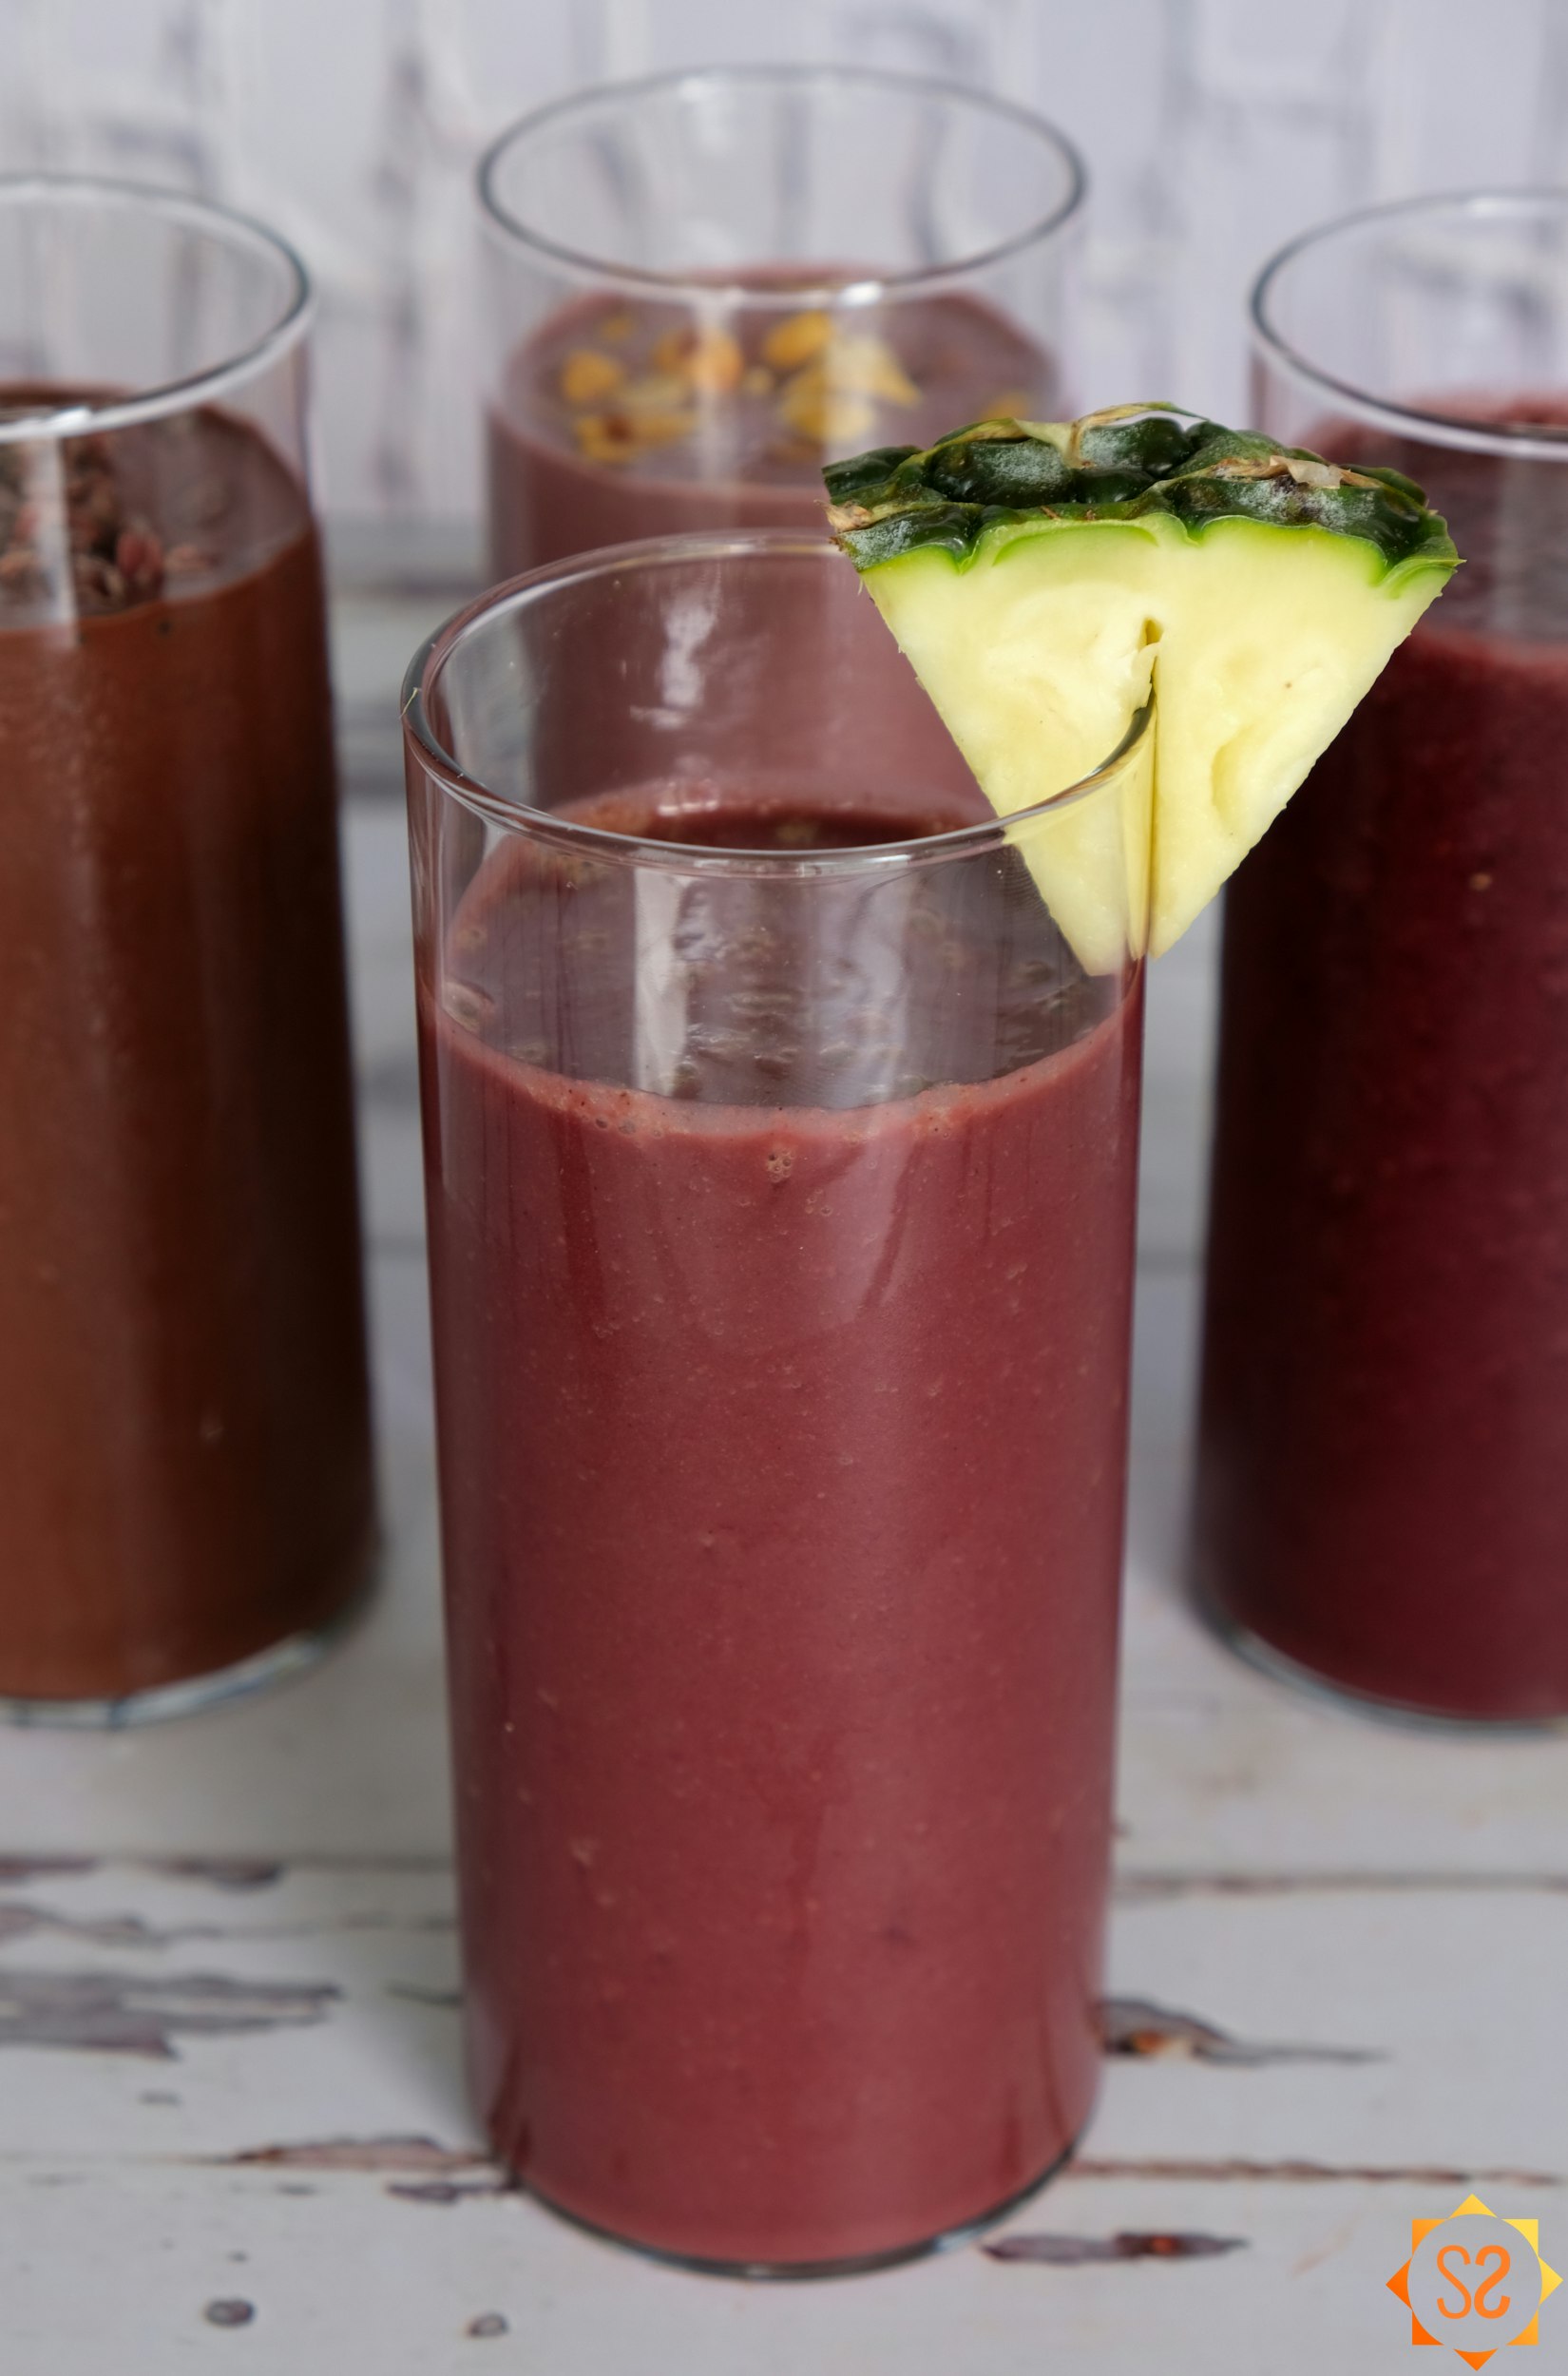 Pineapple-ginger Açaí smoothie surrounded by three other Açaí smoothies